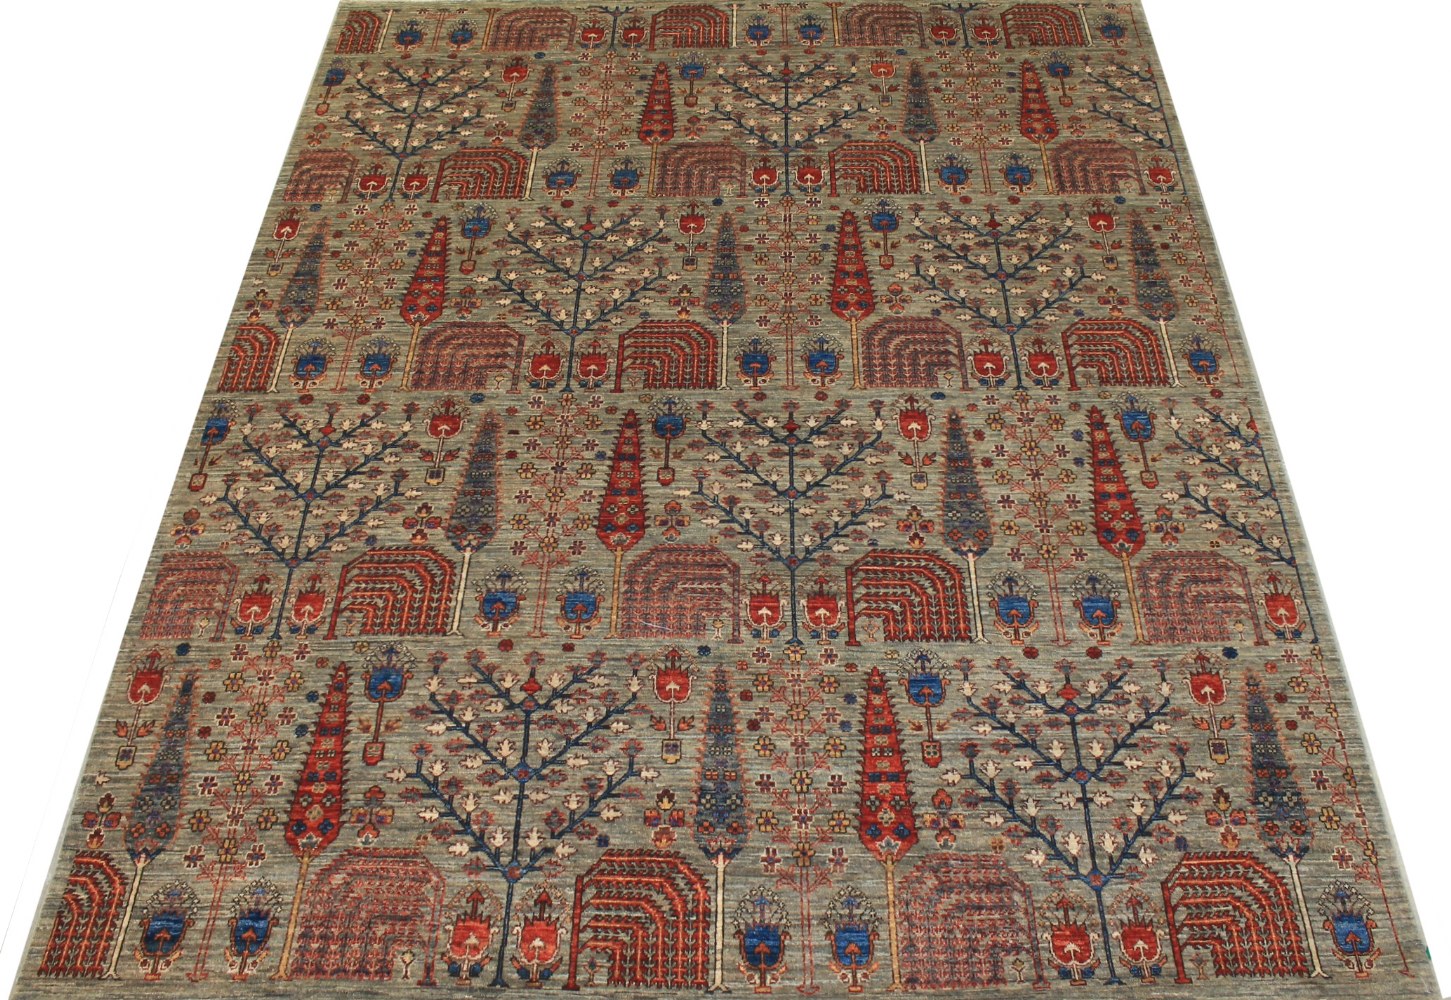 8x10 Aryana & Antique Revivals Hand Knotted Wool Area Rug - MR026344